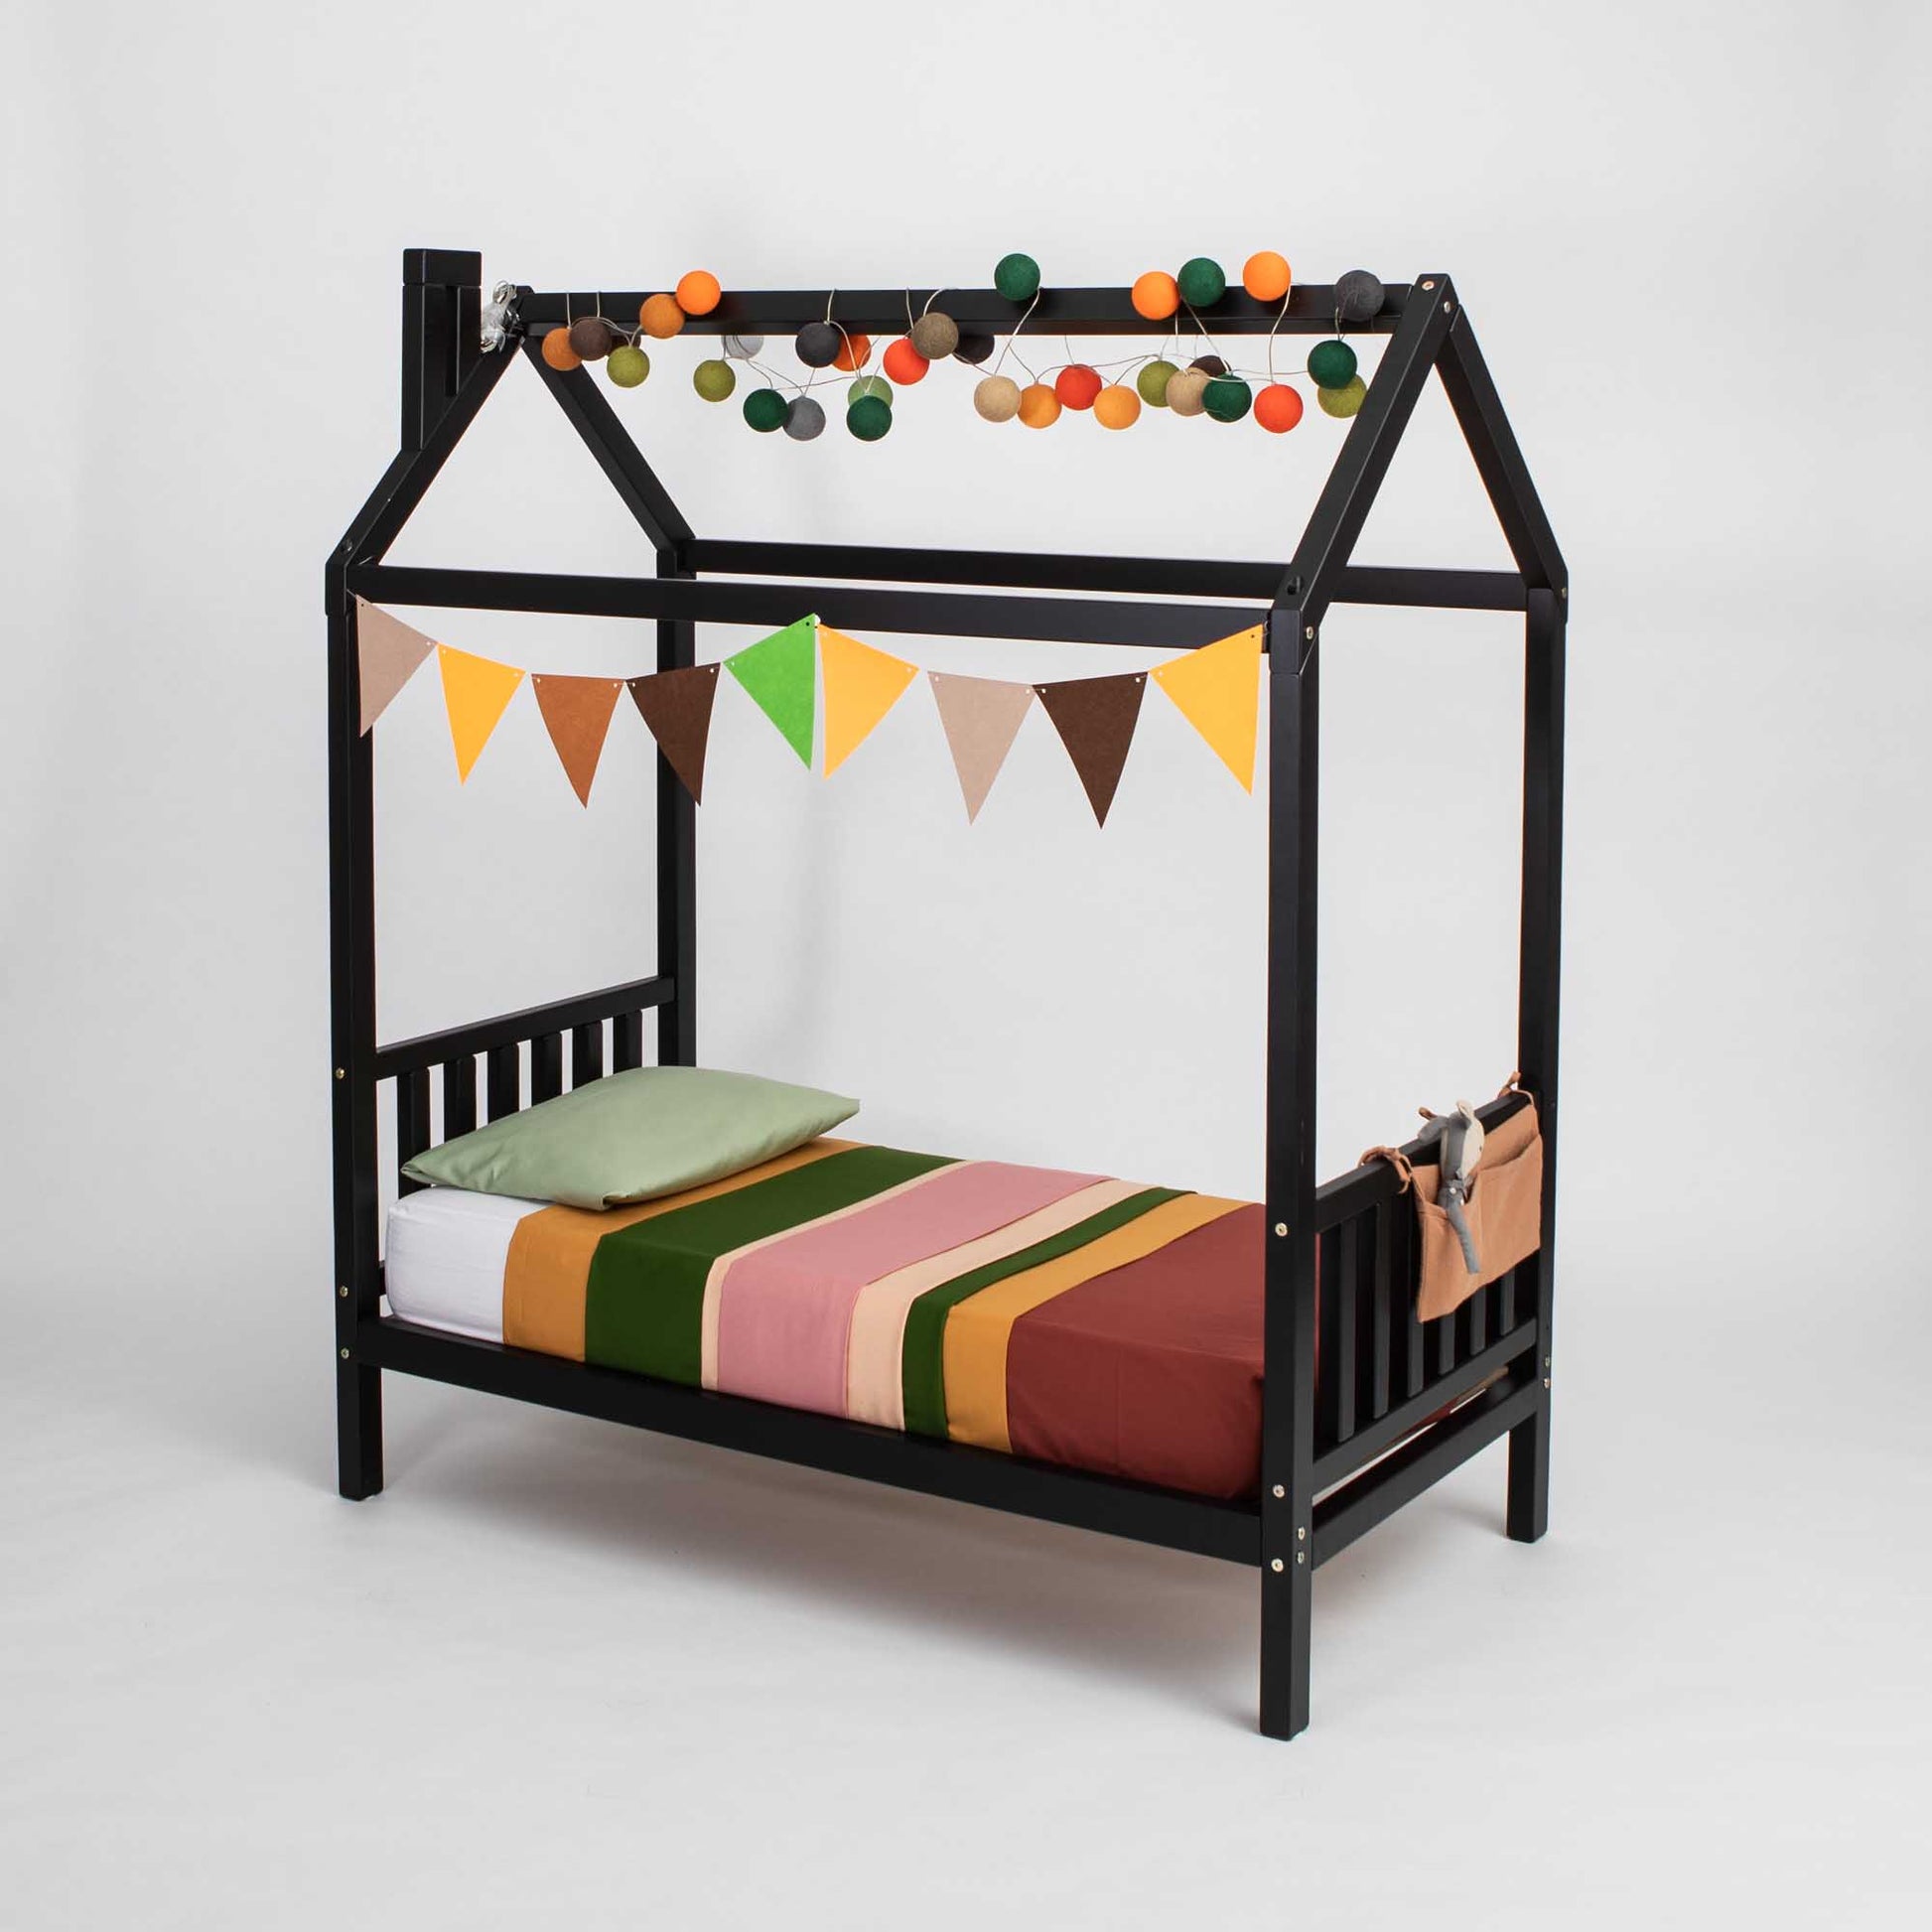 A toddler house bed on legs with a headboard and footboard with a raised house bed and canopy.